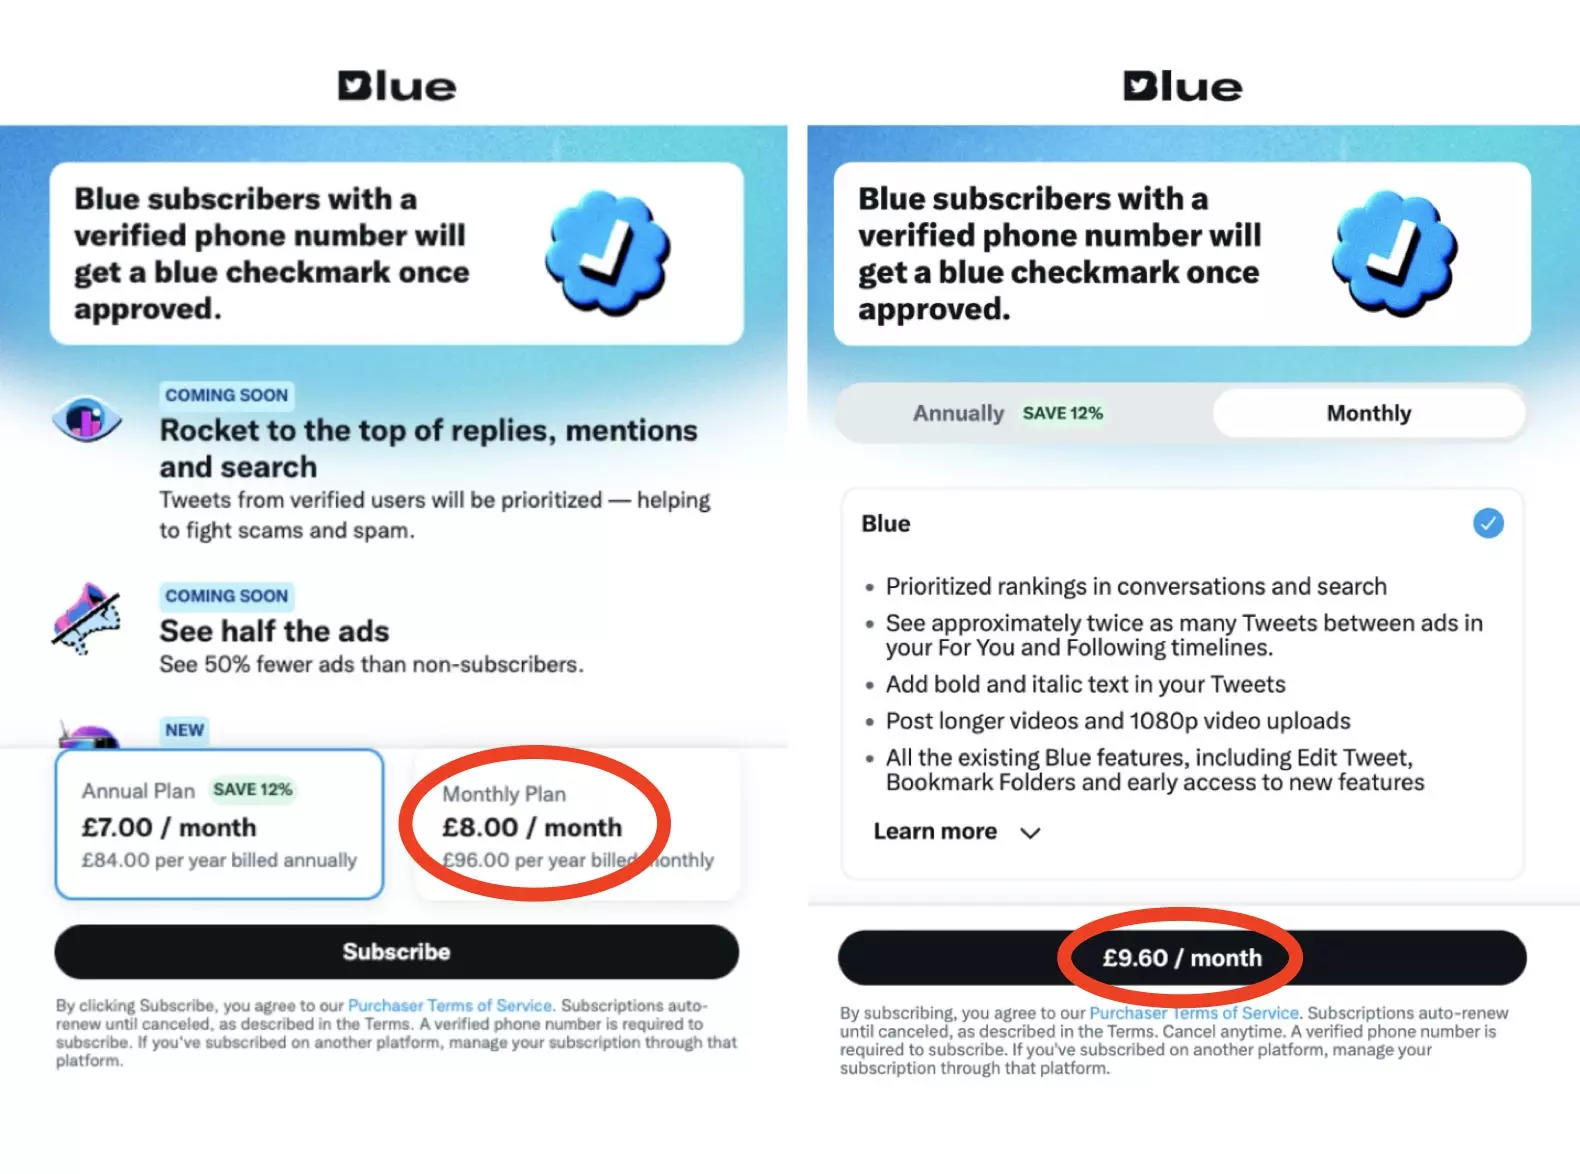 A side-by-side comparison of the Twitter Blue checkout screen shows how the advertised monthly price has quietly gone up 20%, from £8 to £9.60